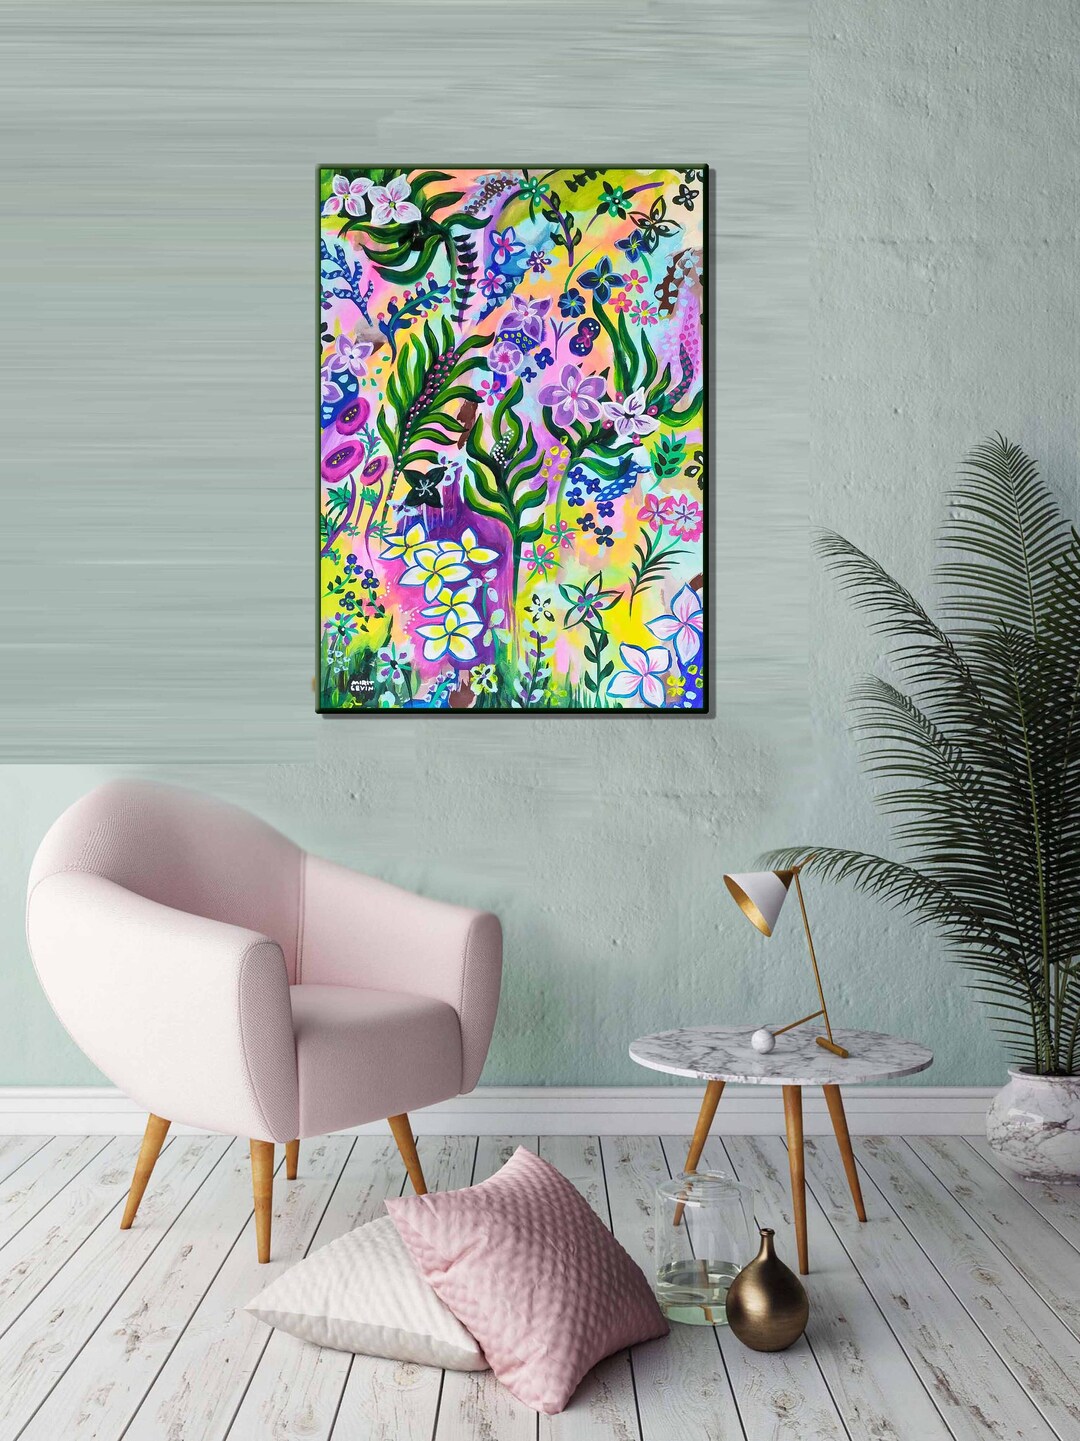 Flower Painting Original on Canvas Colorful Floral Abstract - Etsy